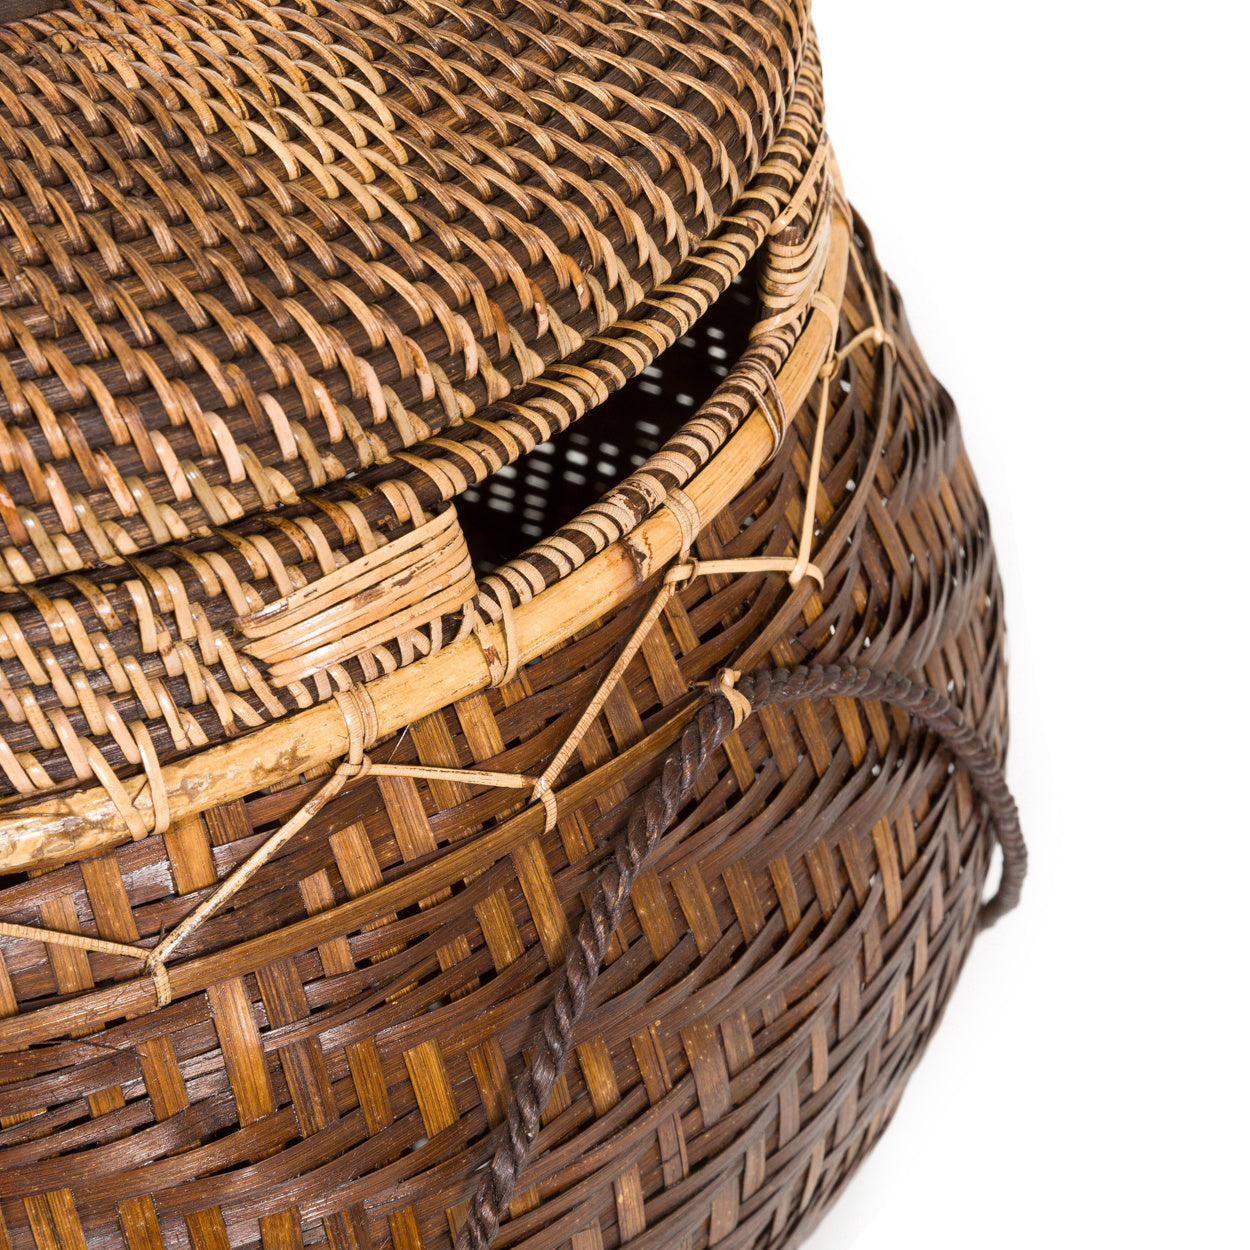 THE COLONIAL Basket side detail crop view